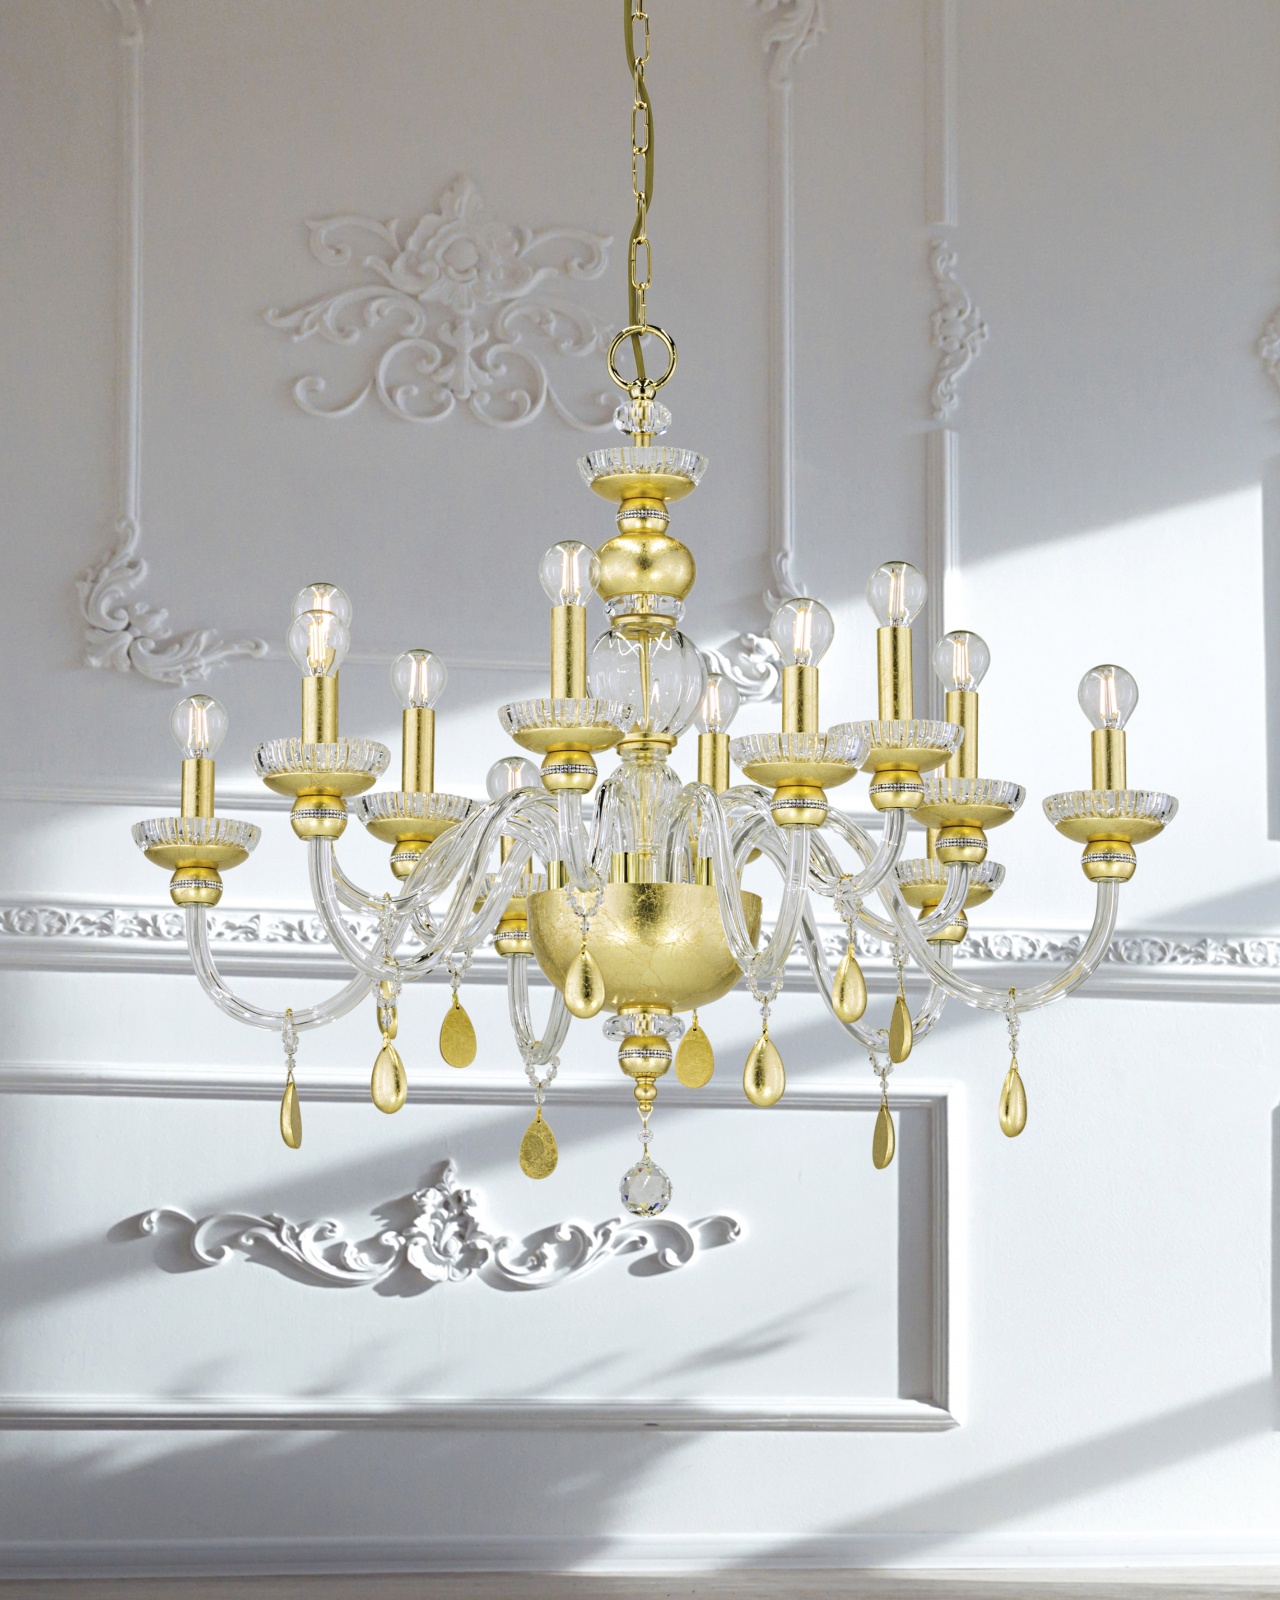 New creation "Juliana" Crystal Chandelier Collection